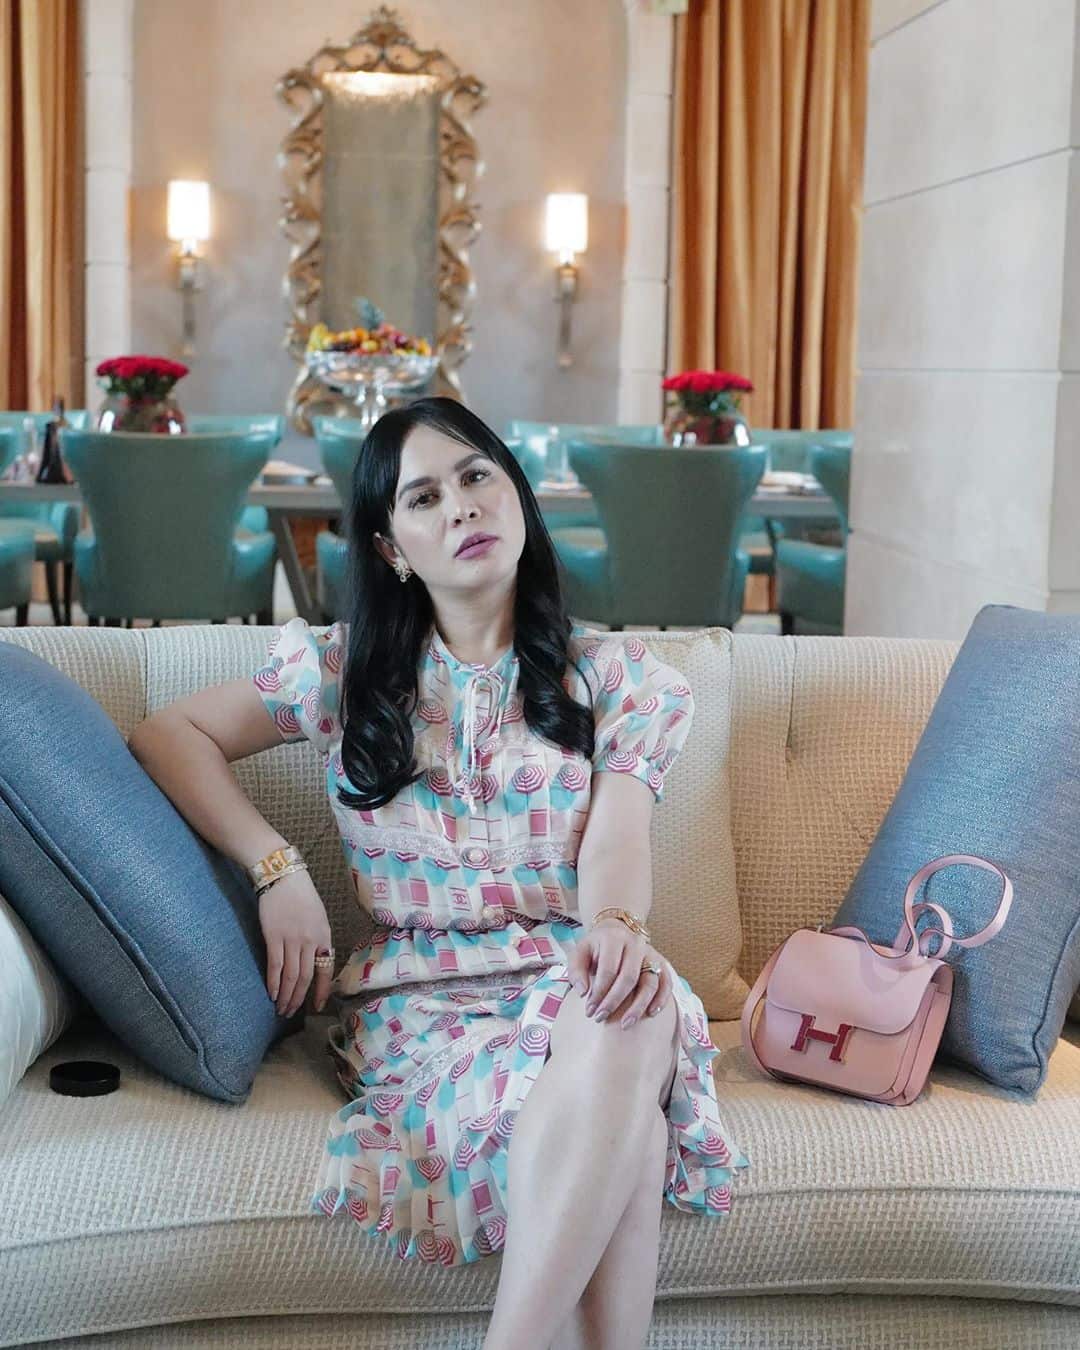 Jinkee Pacquiao Is Selling Her Pre-Loved Designer Items This Month!